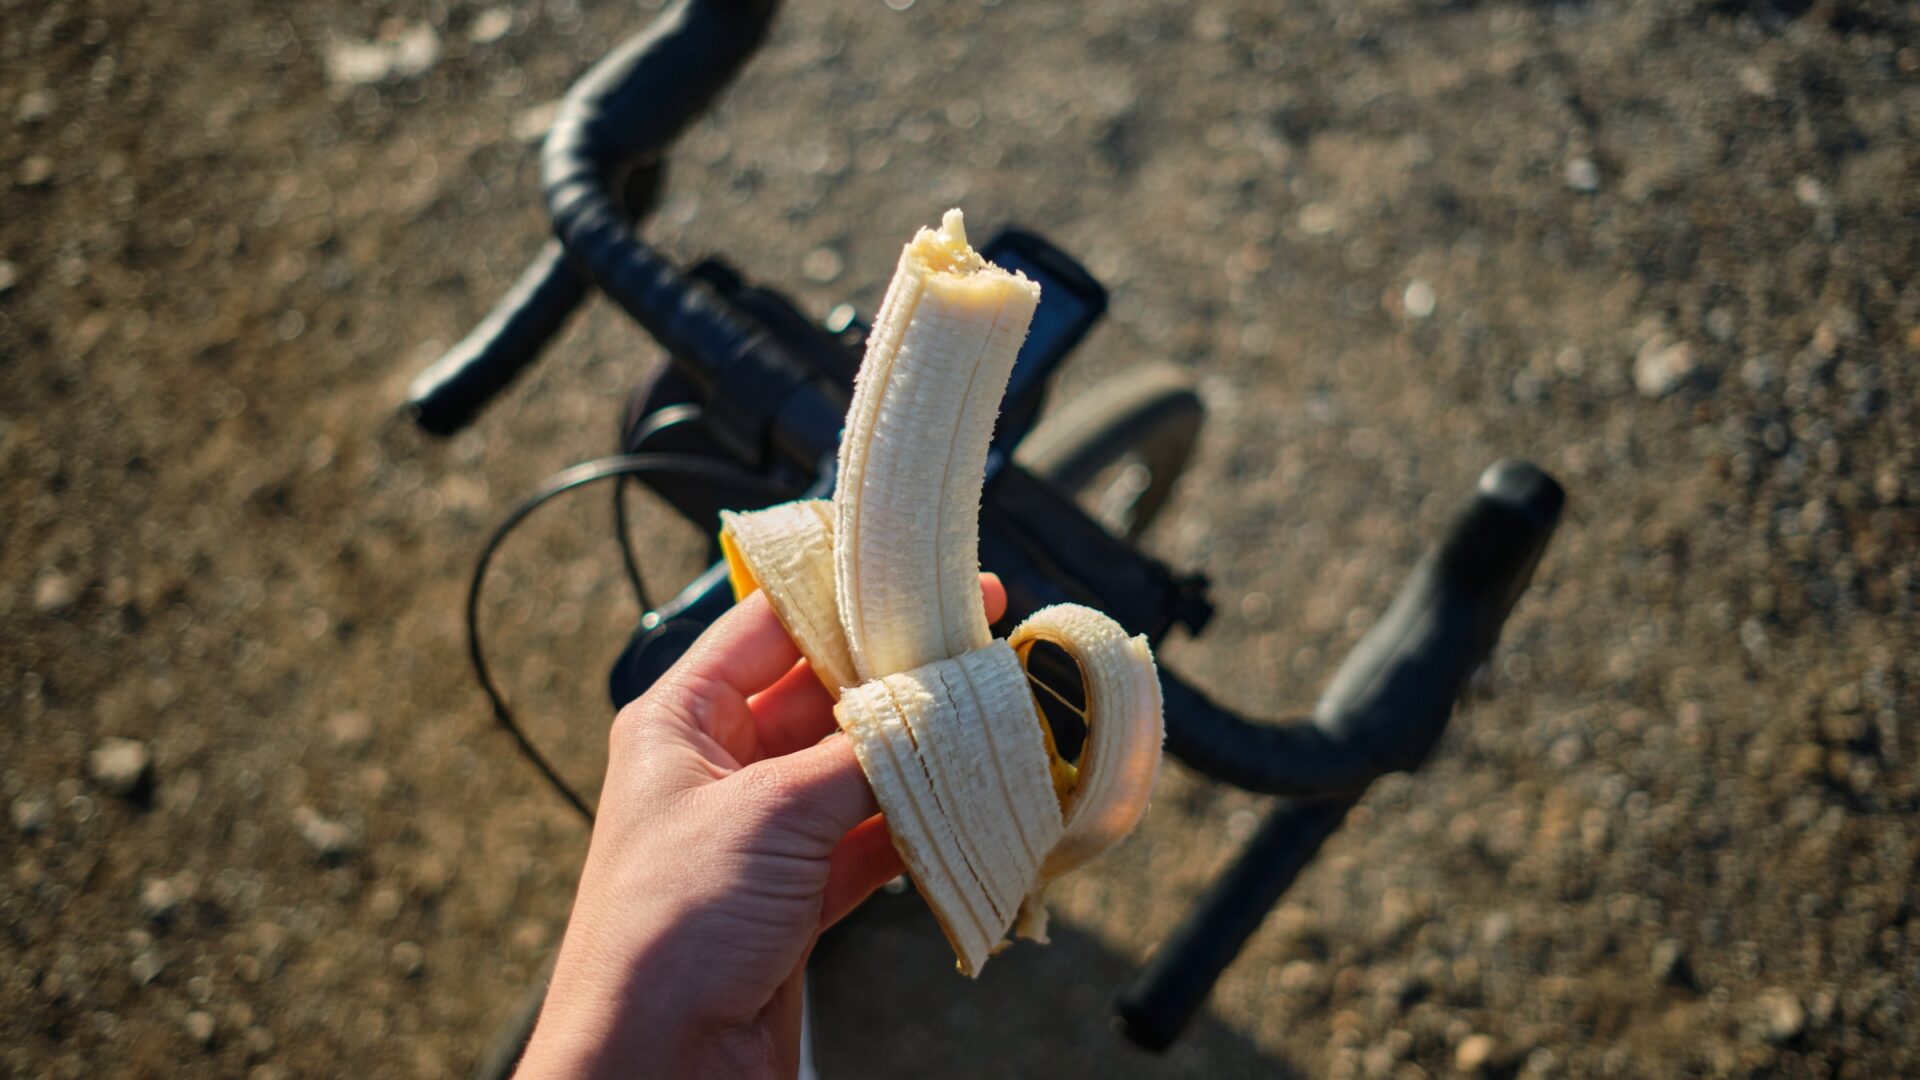 First-person POV eating a banana on a bike ride